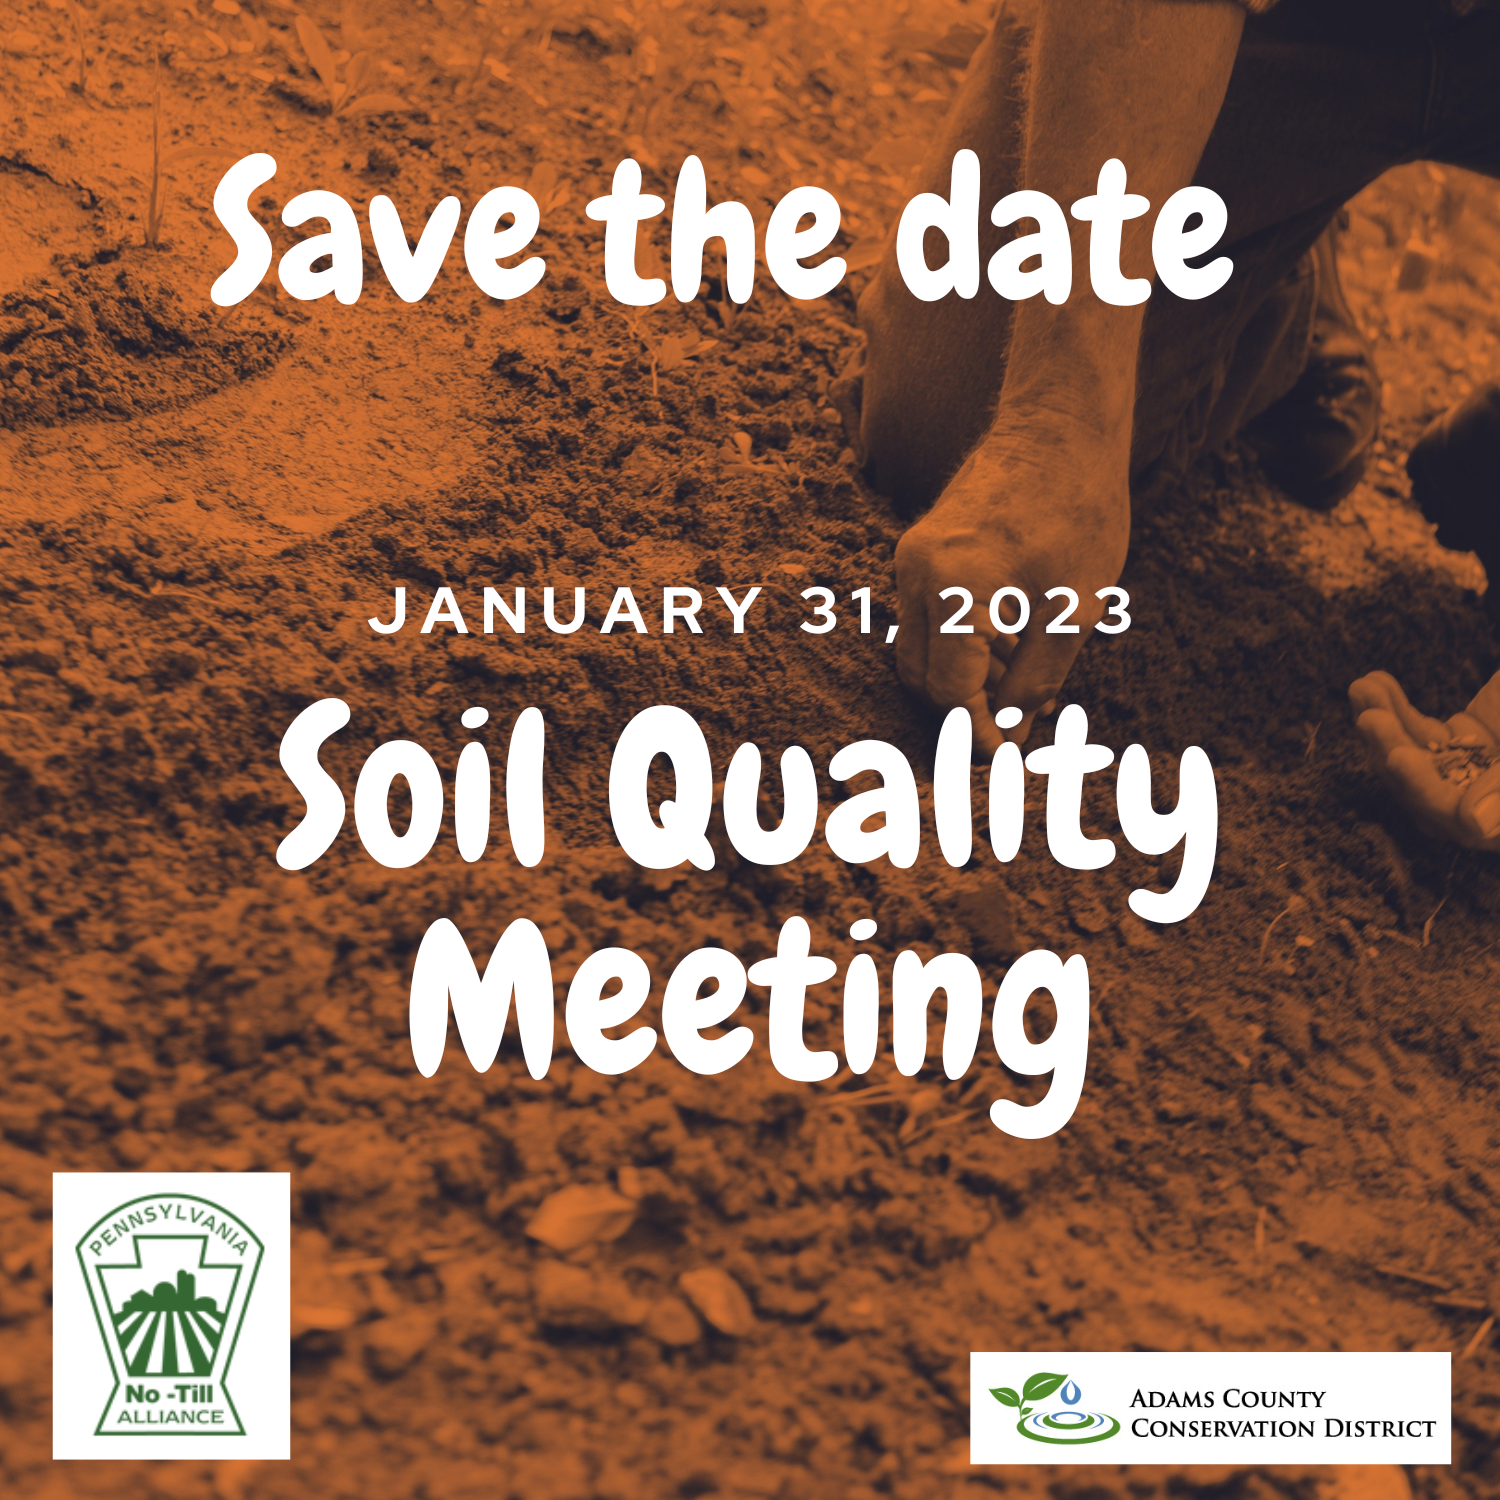 Save the Date January 31, 2023 Soil Quality Meeting